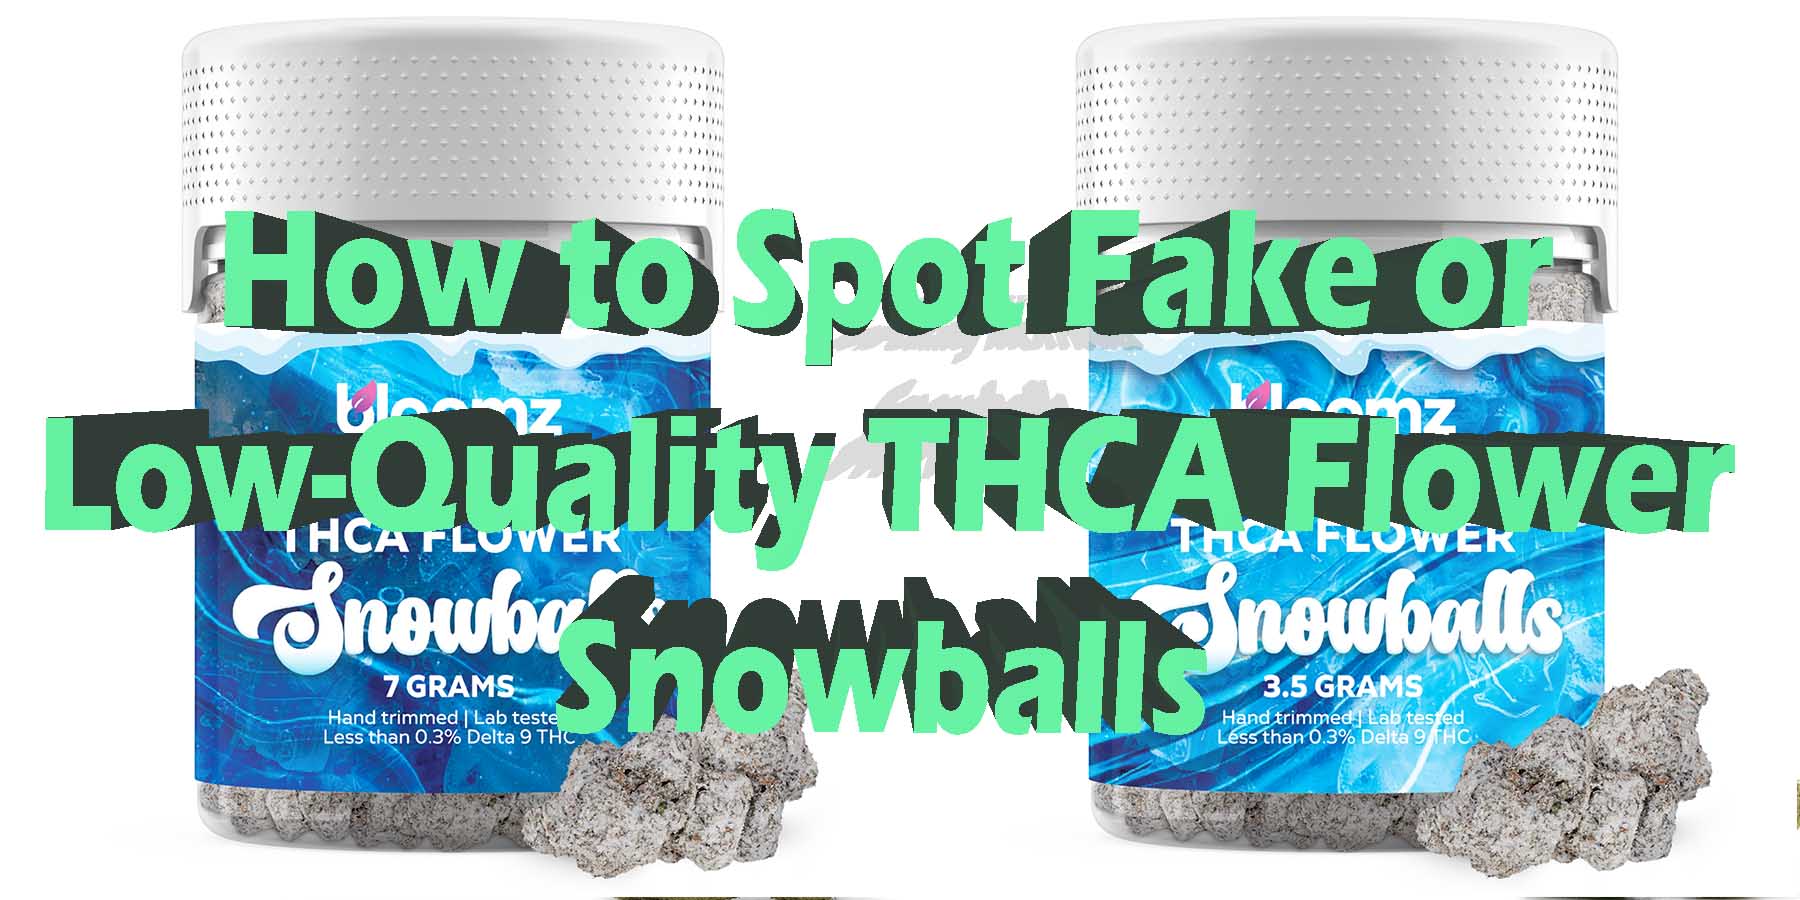 How to Spot Fake or Low Quality THCA Flower Snowballs LowestPrice Coupon Discount For Smoking Best High Smoke Shop Online Where To Buy How To Buy Online Smoke Shop THC Bloomz